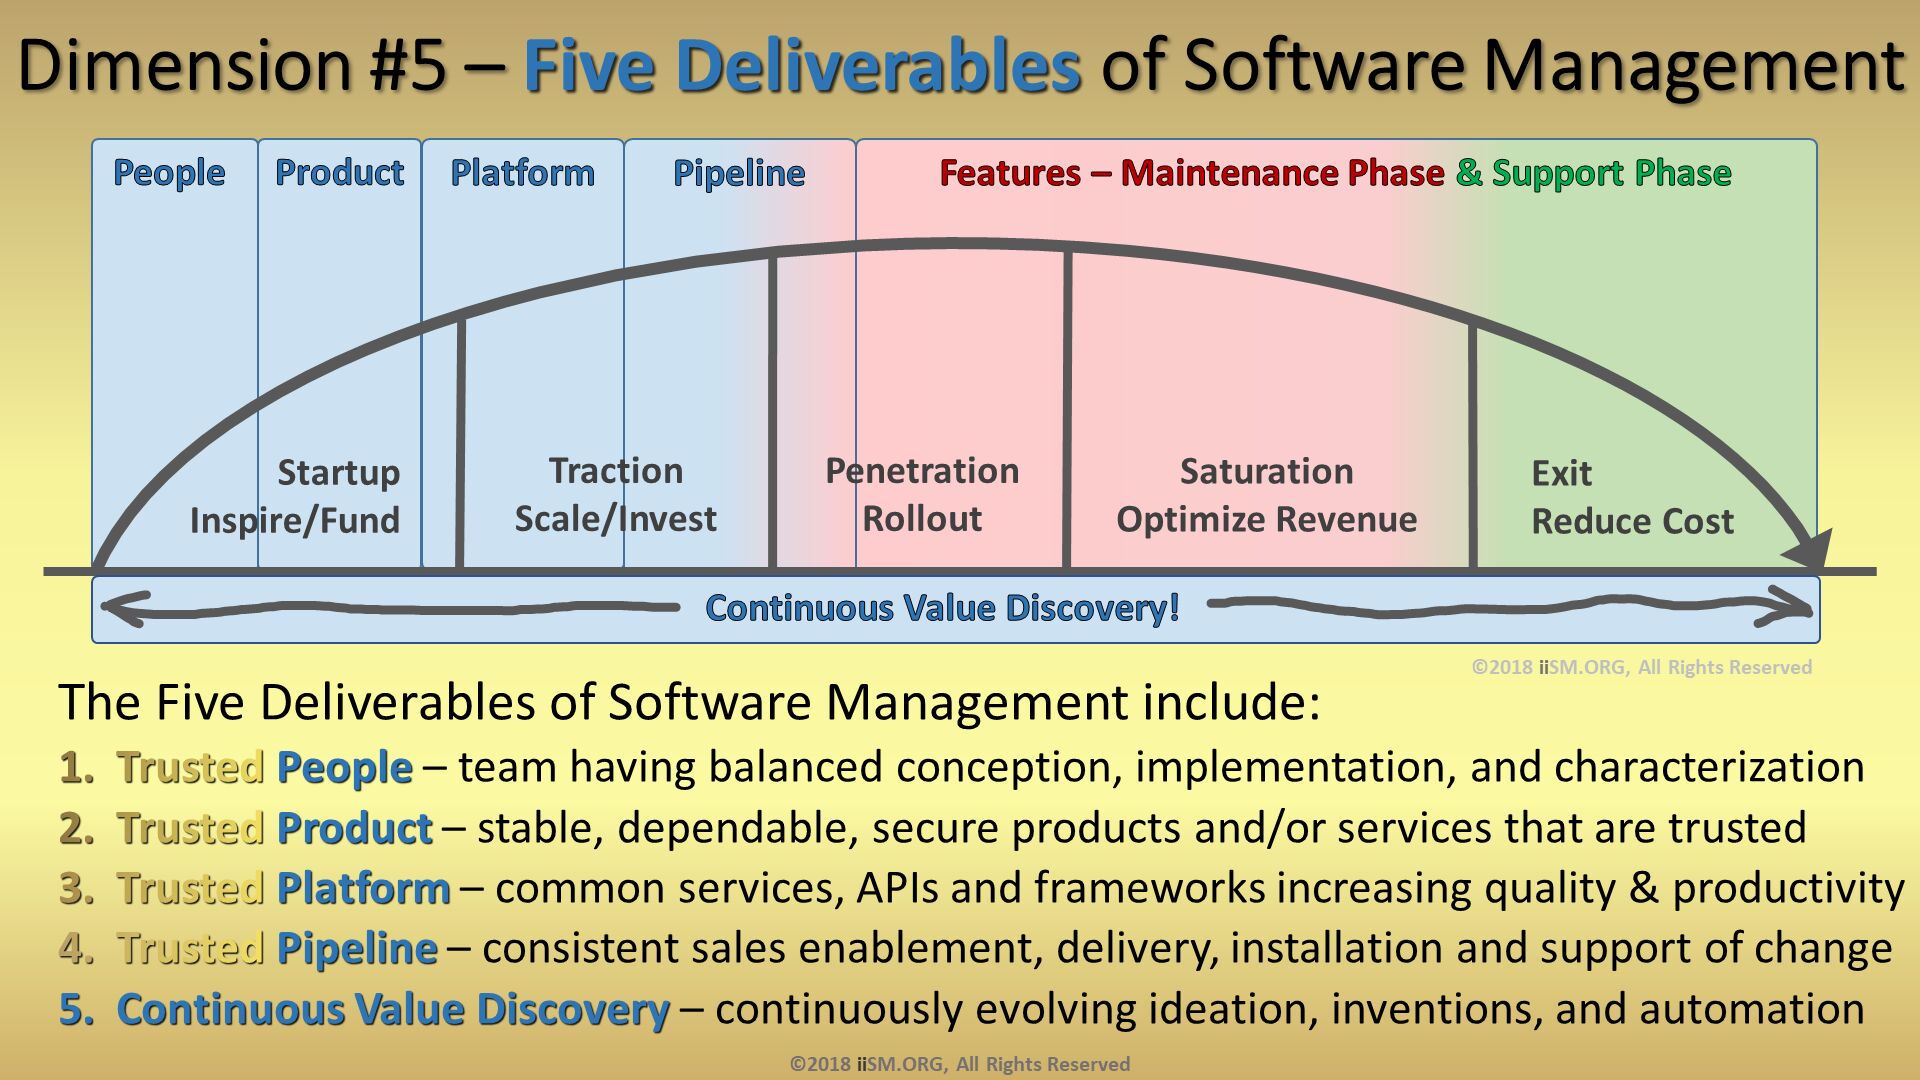 Dimension #5 – Five Deliverables of Software Management . The Five Deliverables of Software Management include:
Trusted People – team having balanced conception, implementation, and characterization
Trusted Product – stable, dependable, secure products and/or services that are trusted
Trusted Platform – common services, APIs and frameworks increasing quality & productivity
Trusted Pipeline – consistent sales enablement, delivery, installation and support of change
Continuous Value Discovery – continuously evolving ideation, inventions, and automation. ©2018 iiSM.ORG, All Rights Reserved. ©2018 iiSM.ORG, All Rights Reserved. 